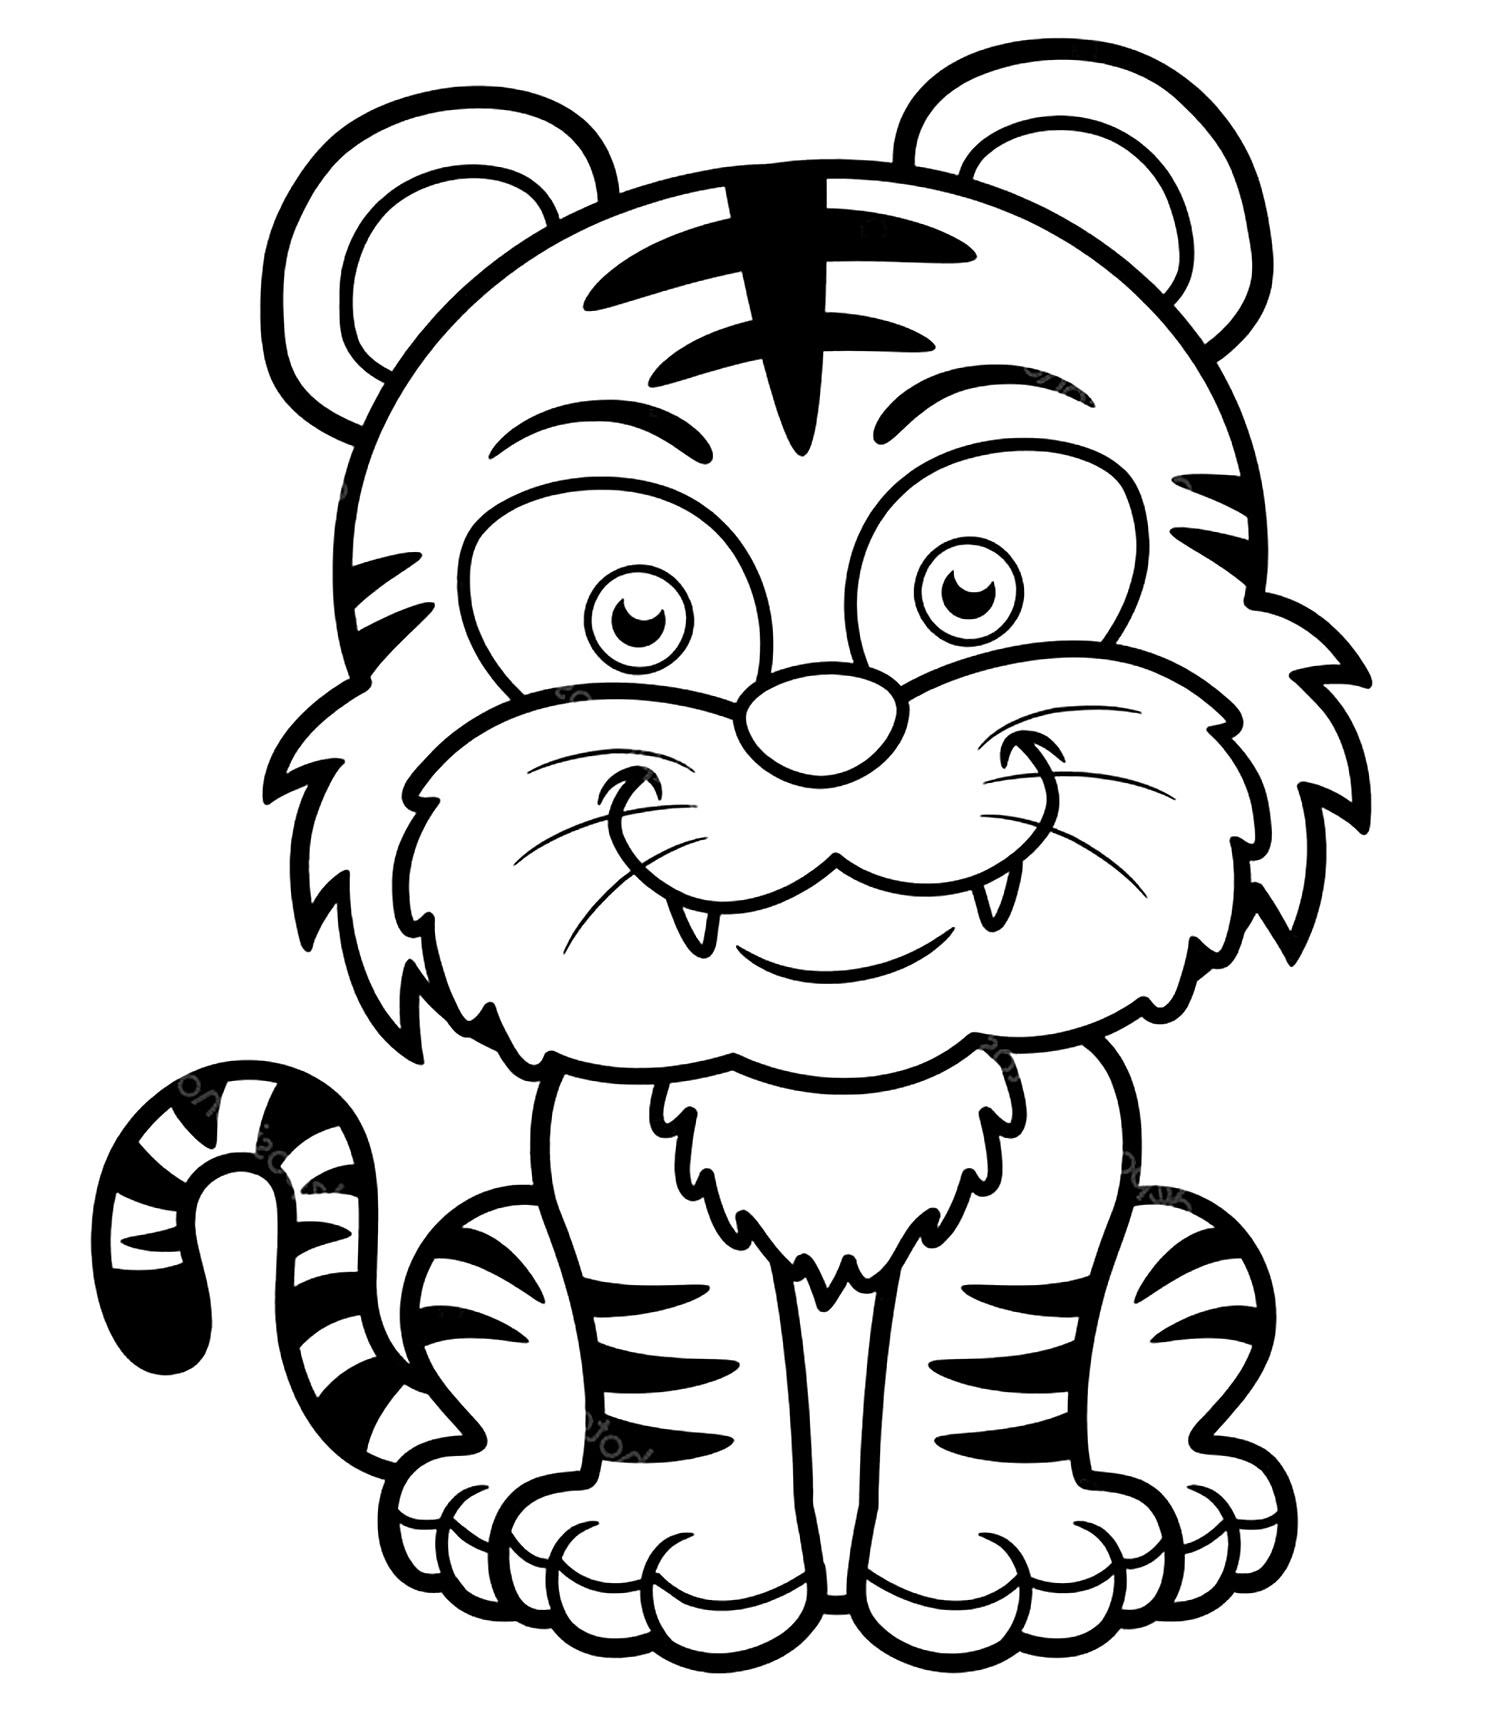 Detroit Tigers Coloring Pages - Learny Kids